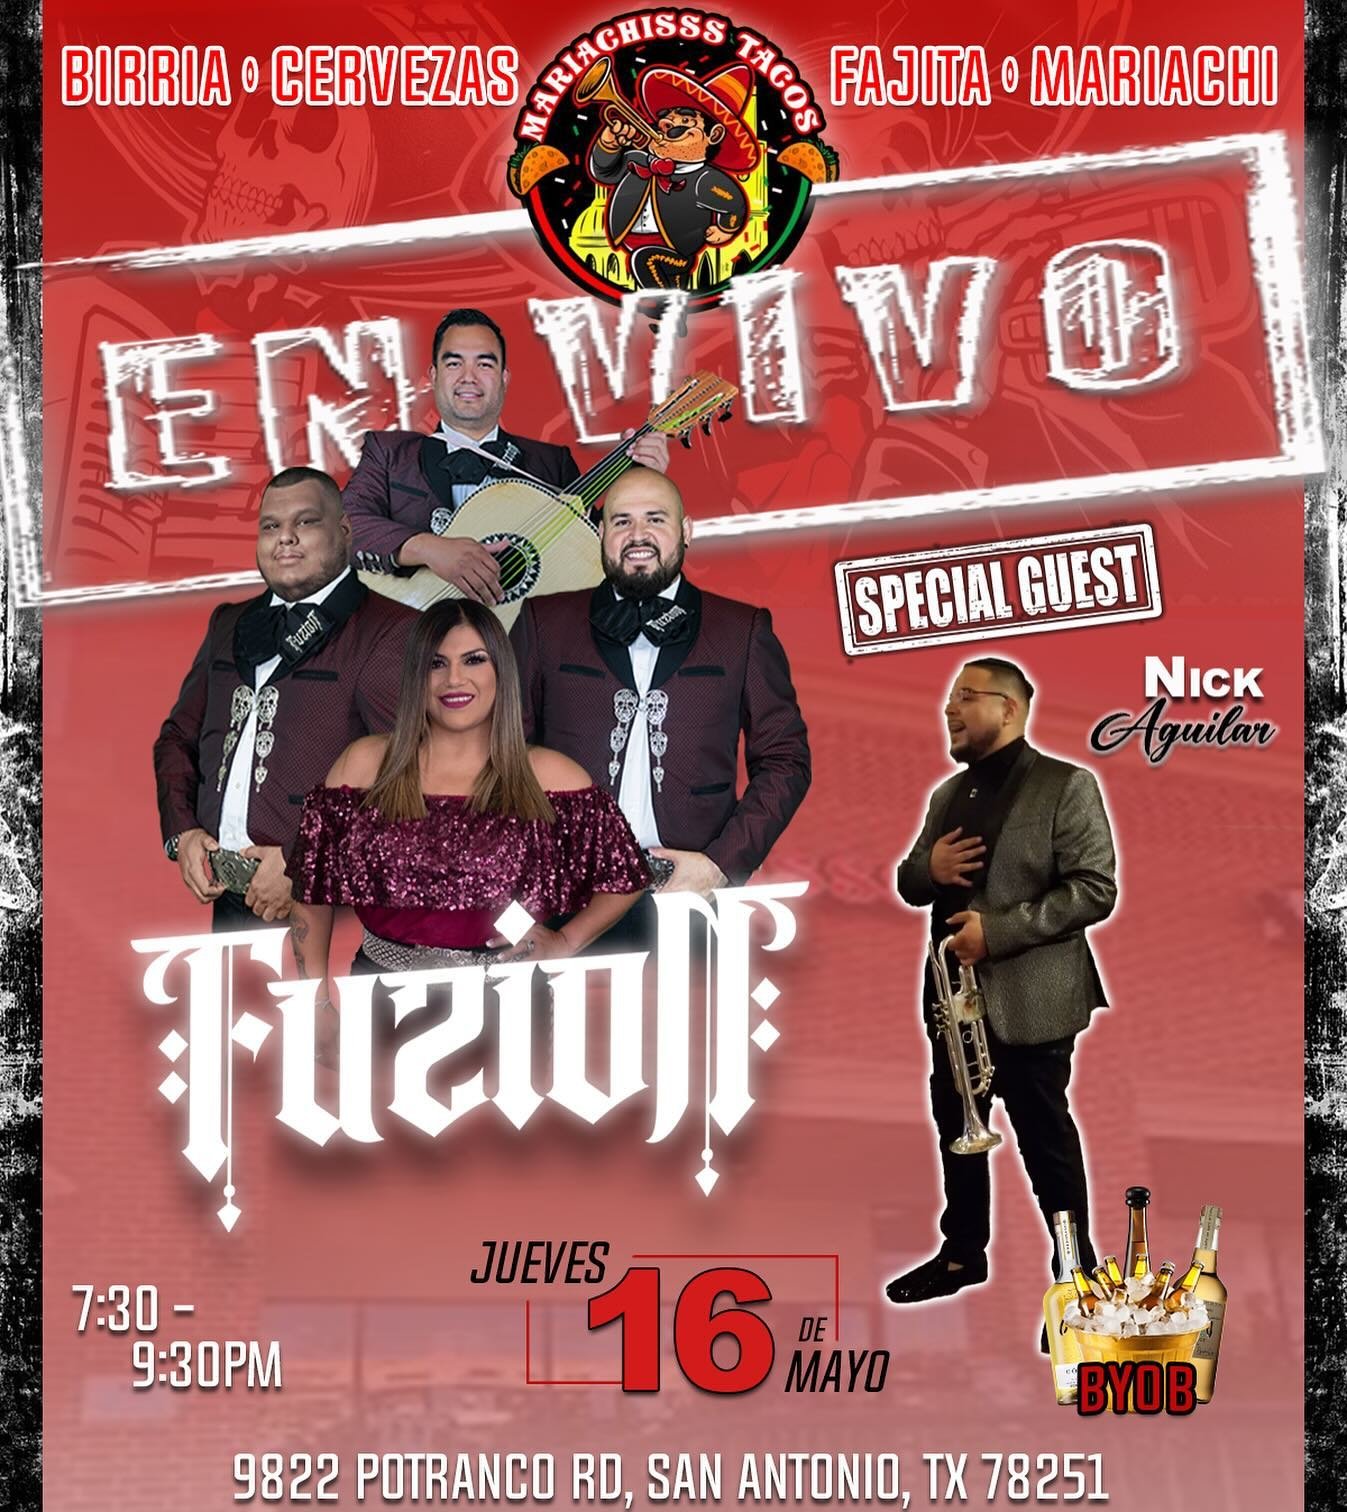 ❗️THURSDAY NITE❗️

We&rsquo;re back LIVE at @mariachisss_tacos with a very special guest! Come on out and enjoy our versatile show y el mejor ambiente en San Antonio! 🔥🎶🪗🎺🎤 #fuzionmariachi #thirstythursday #juevebes #kumbia #norte&ntilde;o #band